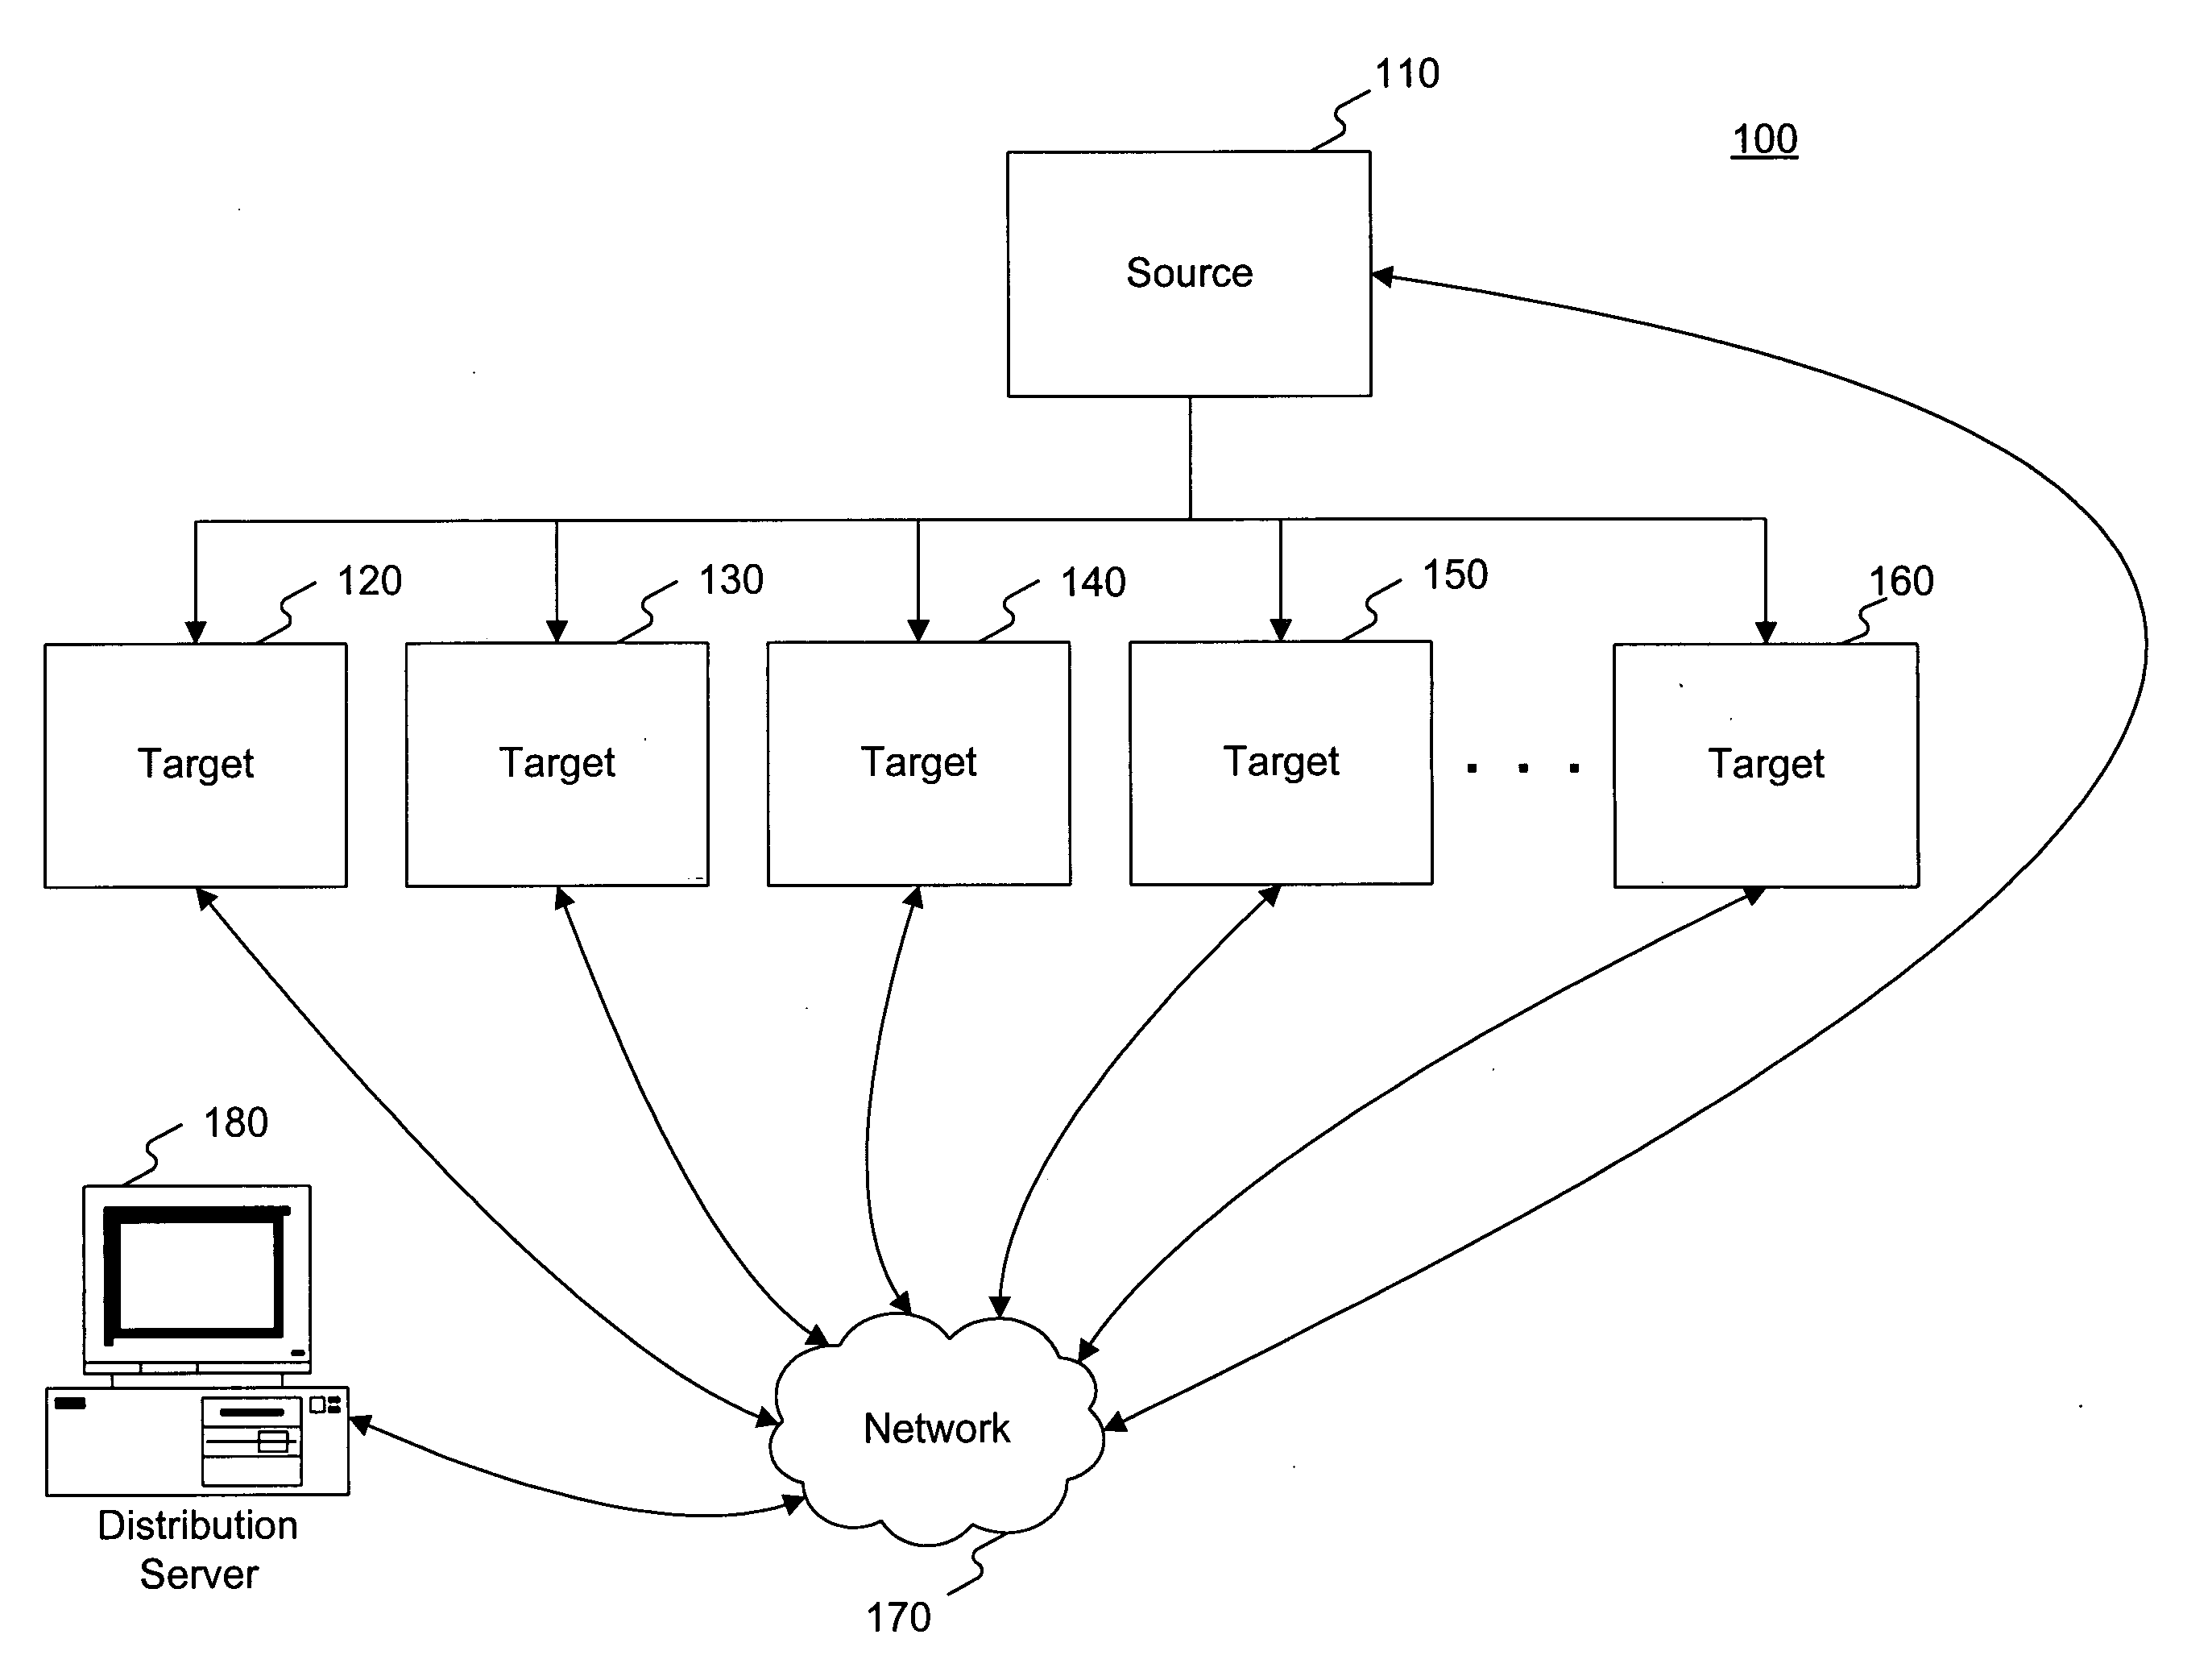 Methods and systems for distributing stock in a distribution network